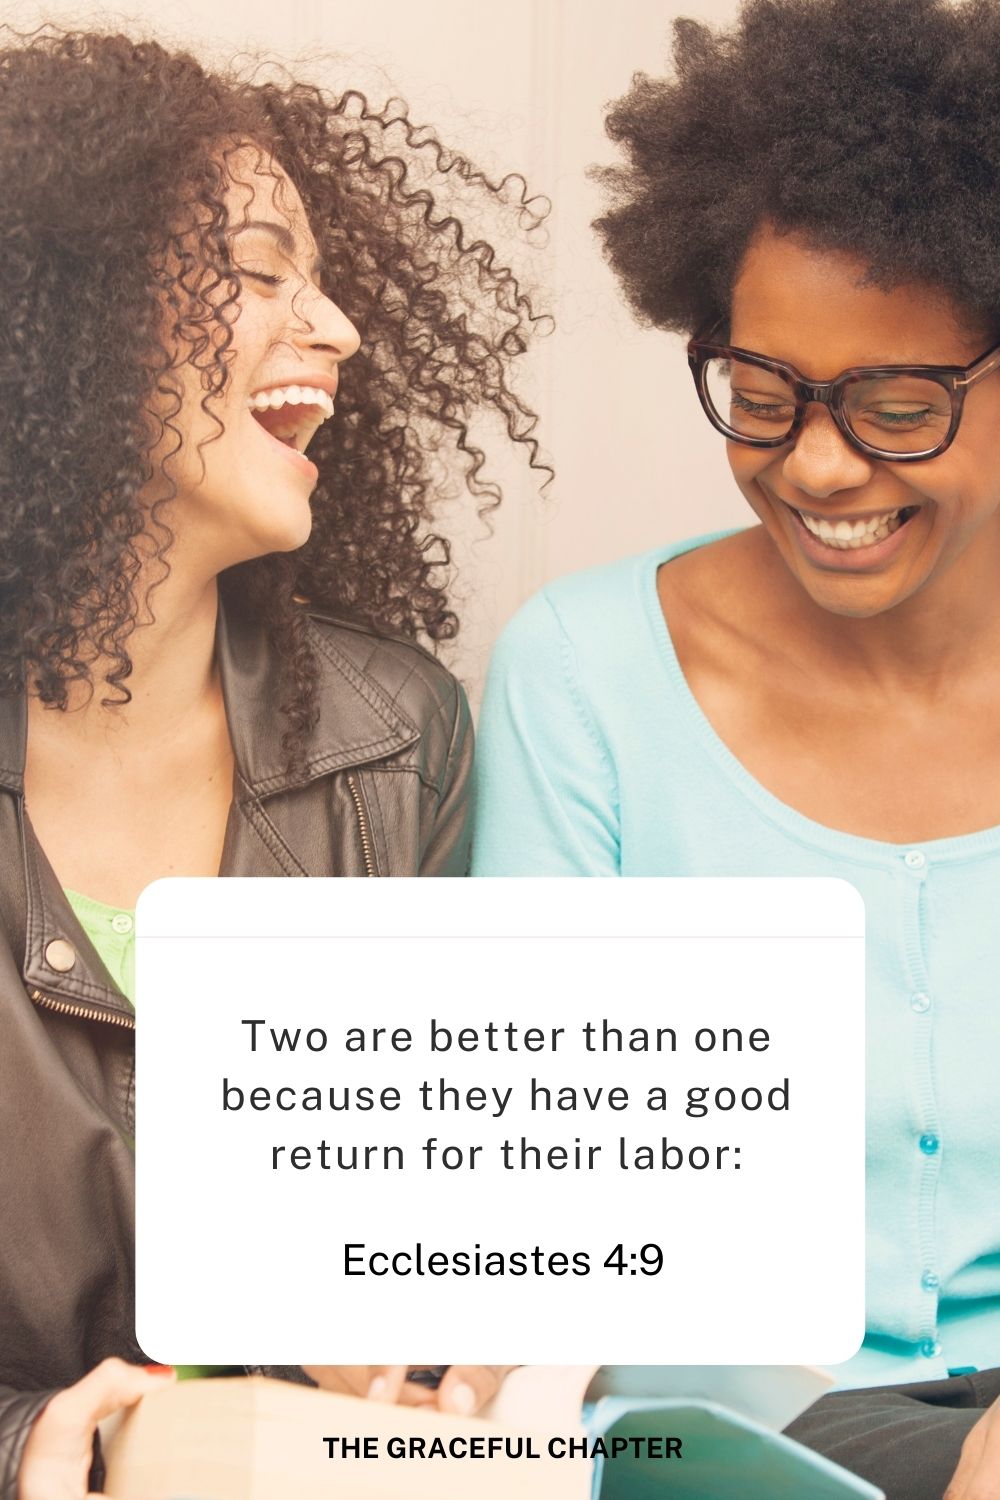 Two are better than one, because they have a good return for their labor:
Ecclesiastes 4:9